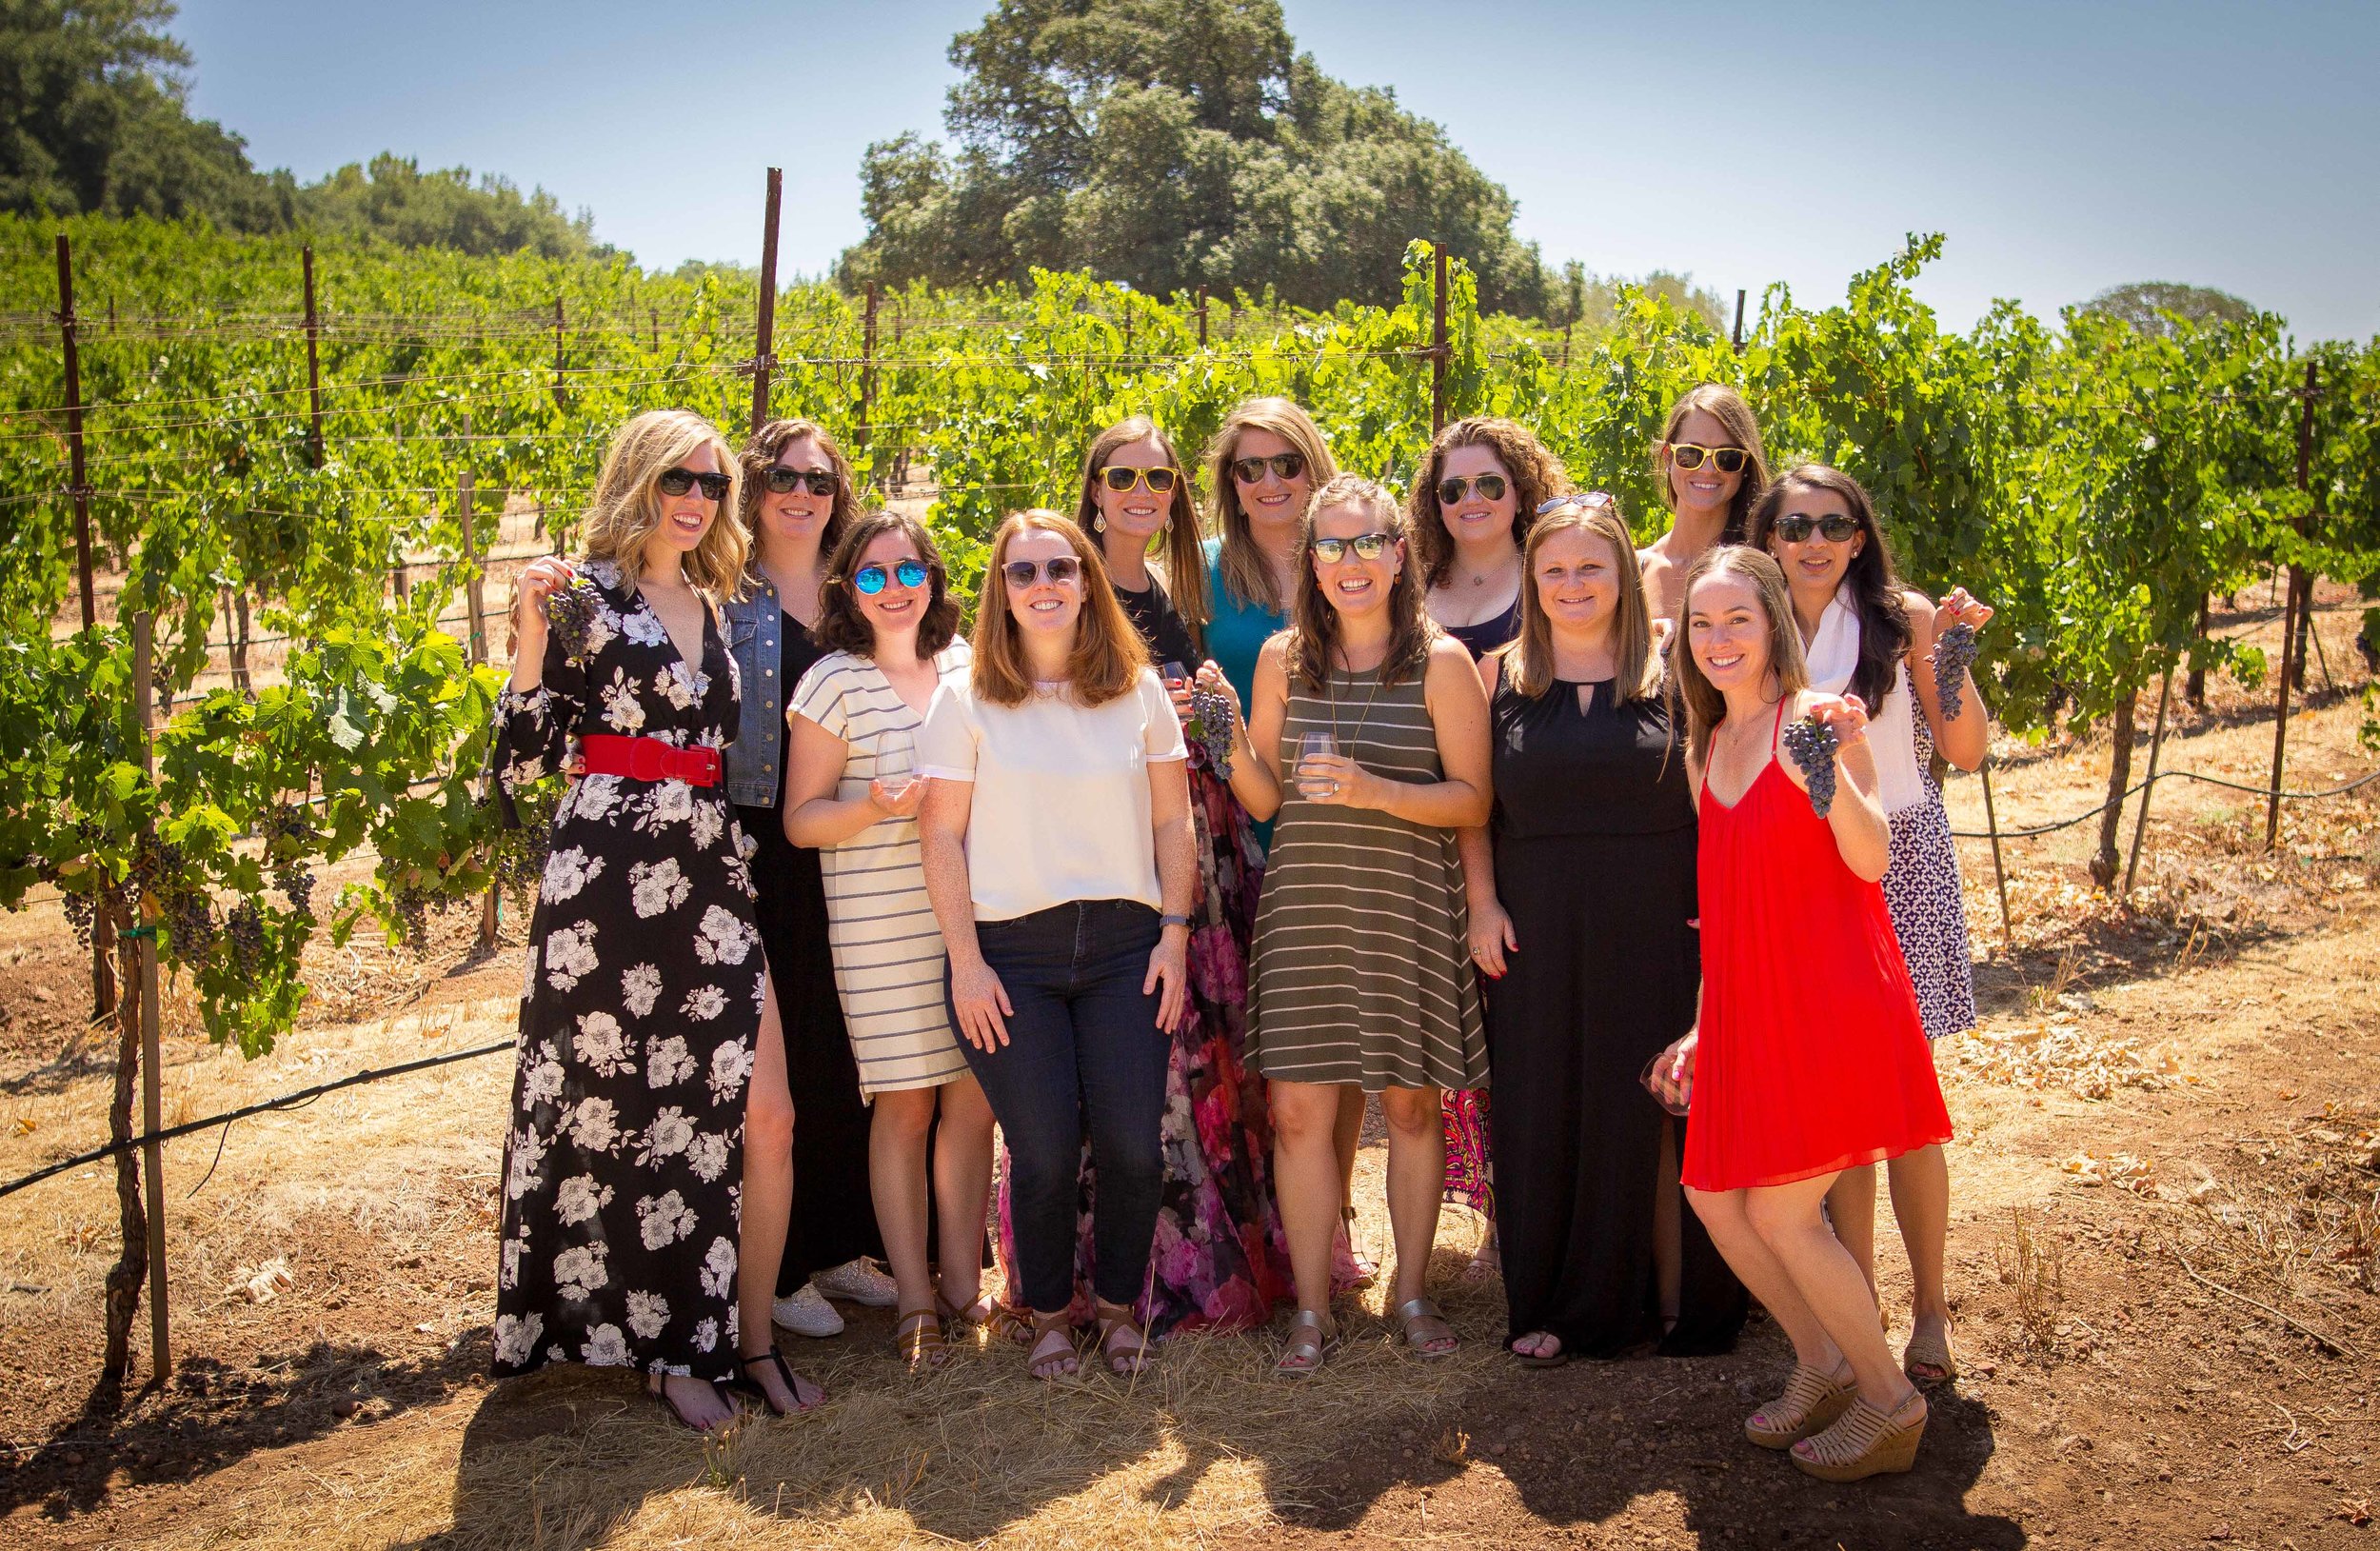 The whole group in the vineyard